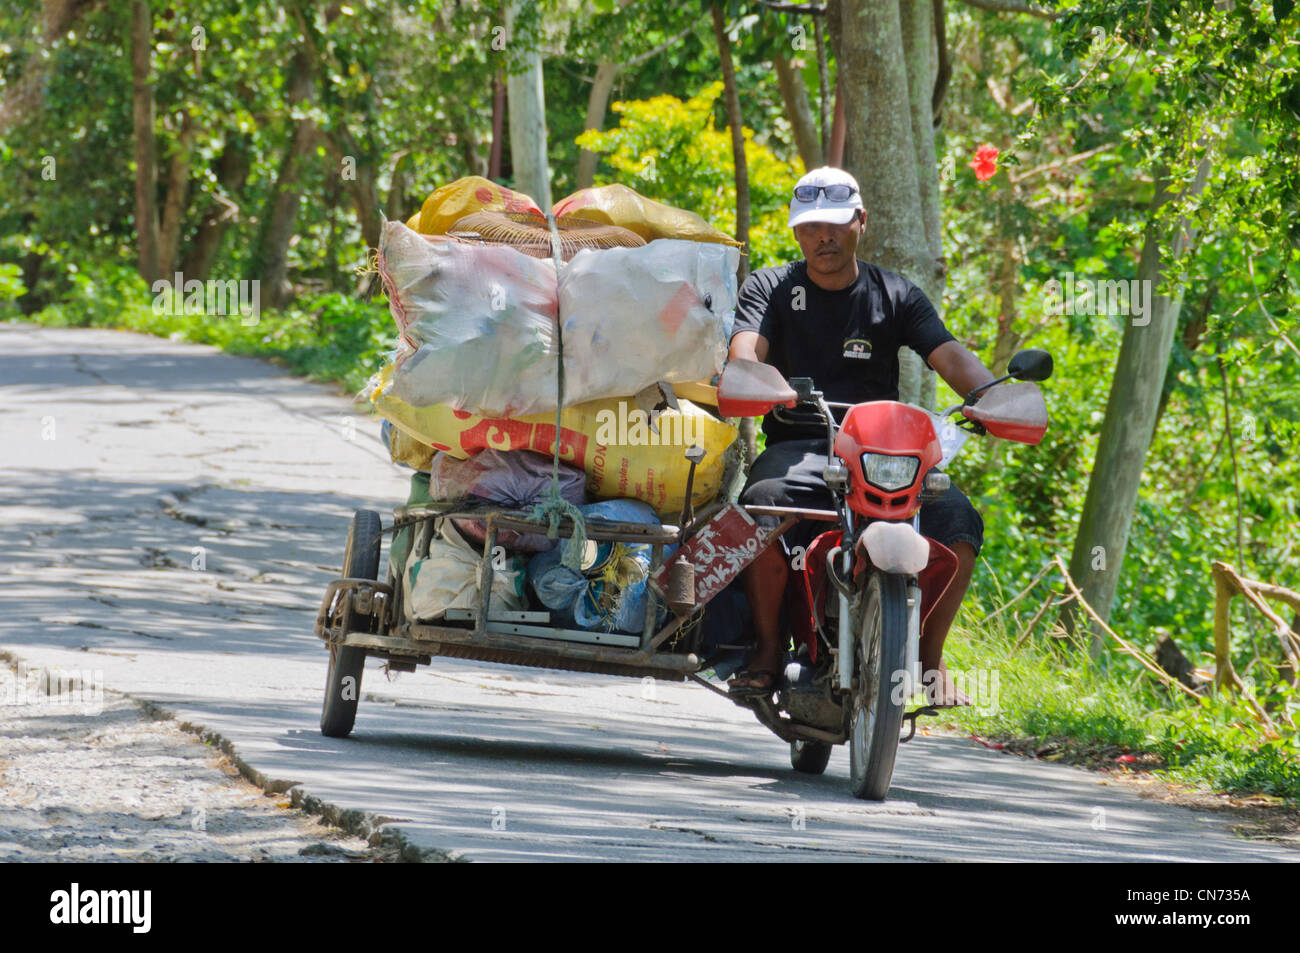 Tricycle Philippine motorbike with side-car Asian male Filipino driver transporting garbage on rural road Puerto Galera Asia Stock Photo